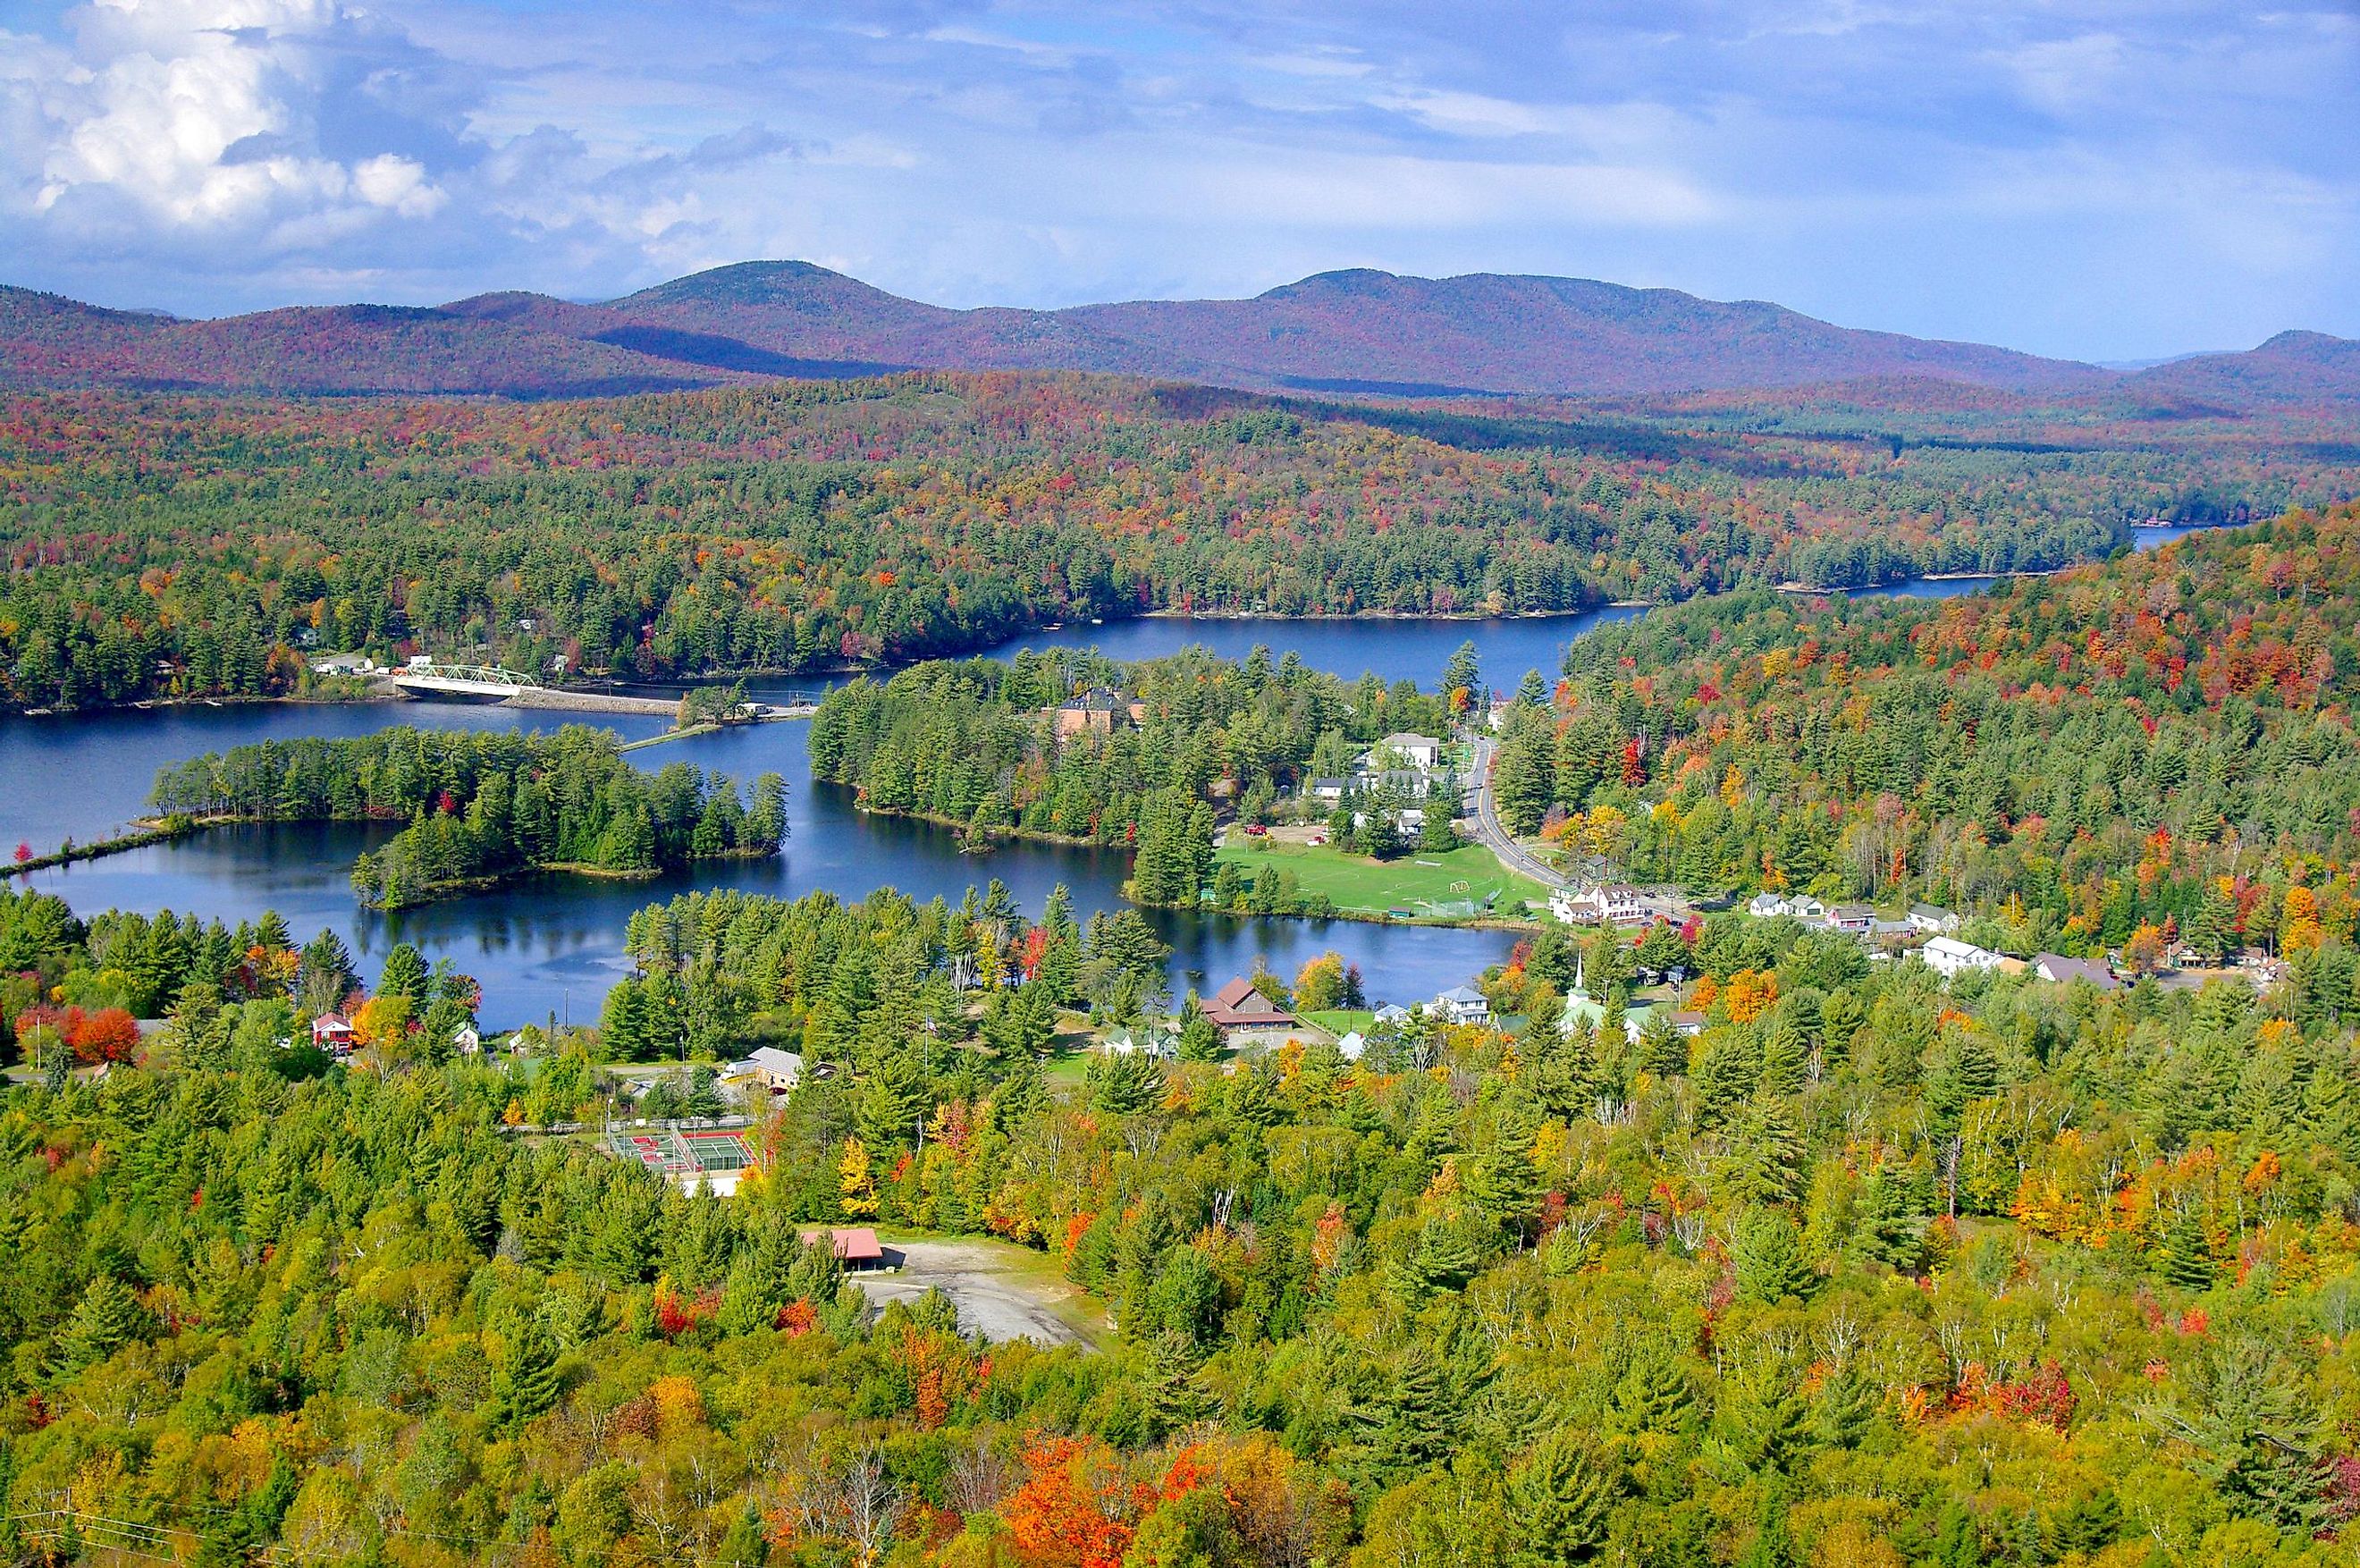 10 Best Small Towns To Visit In The Adirondack Mountains - WorldAtlas